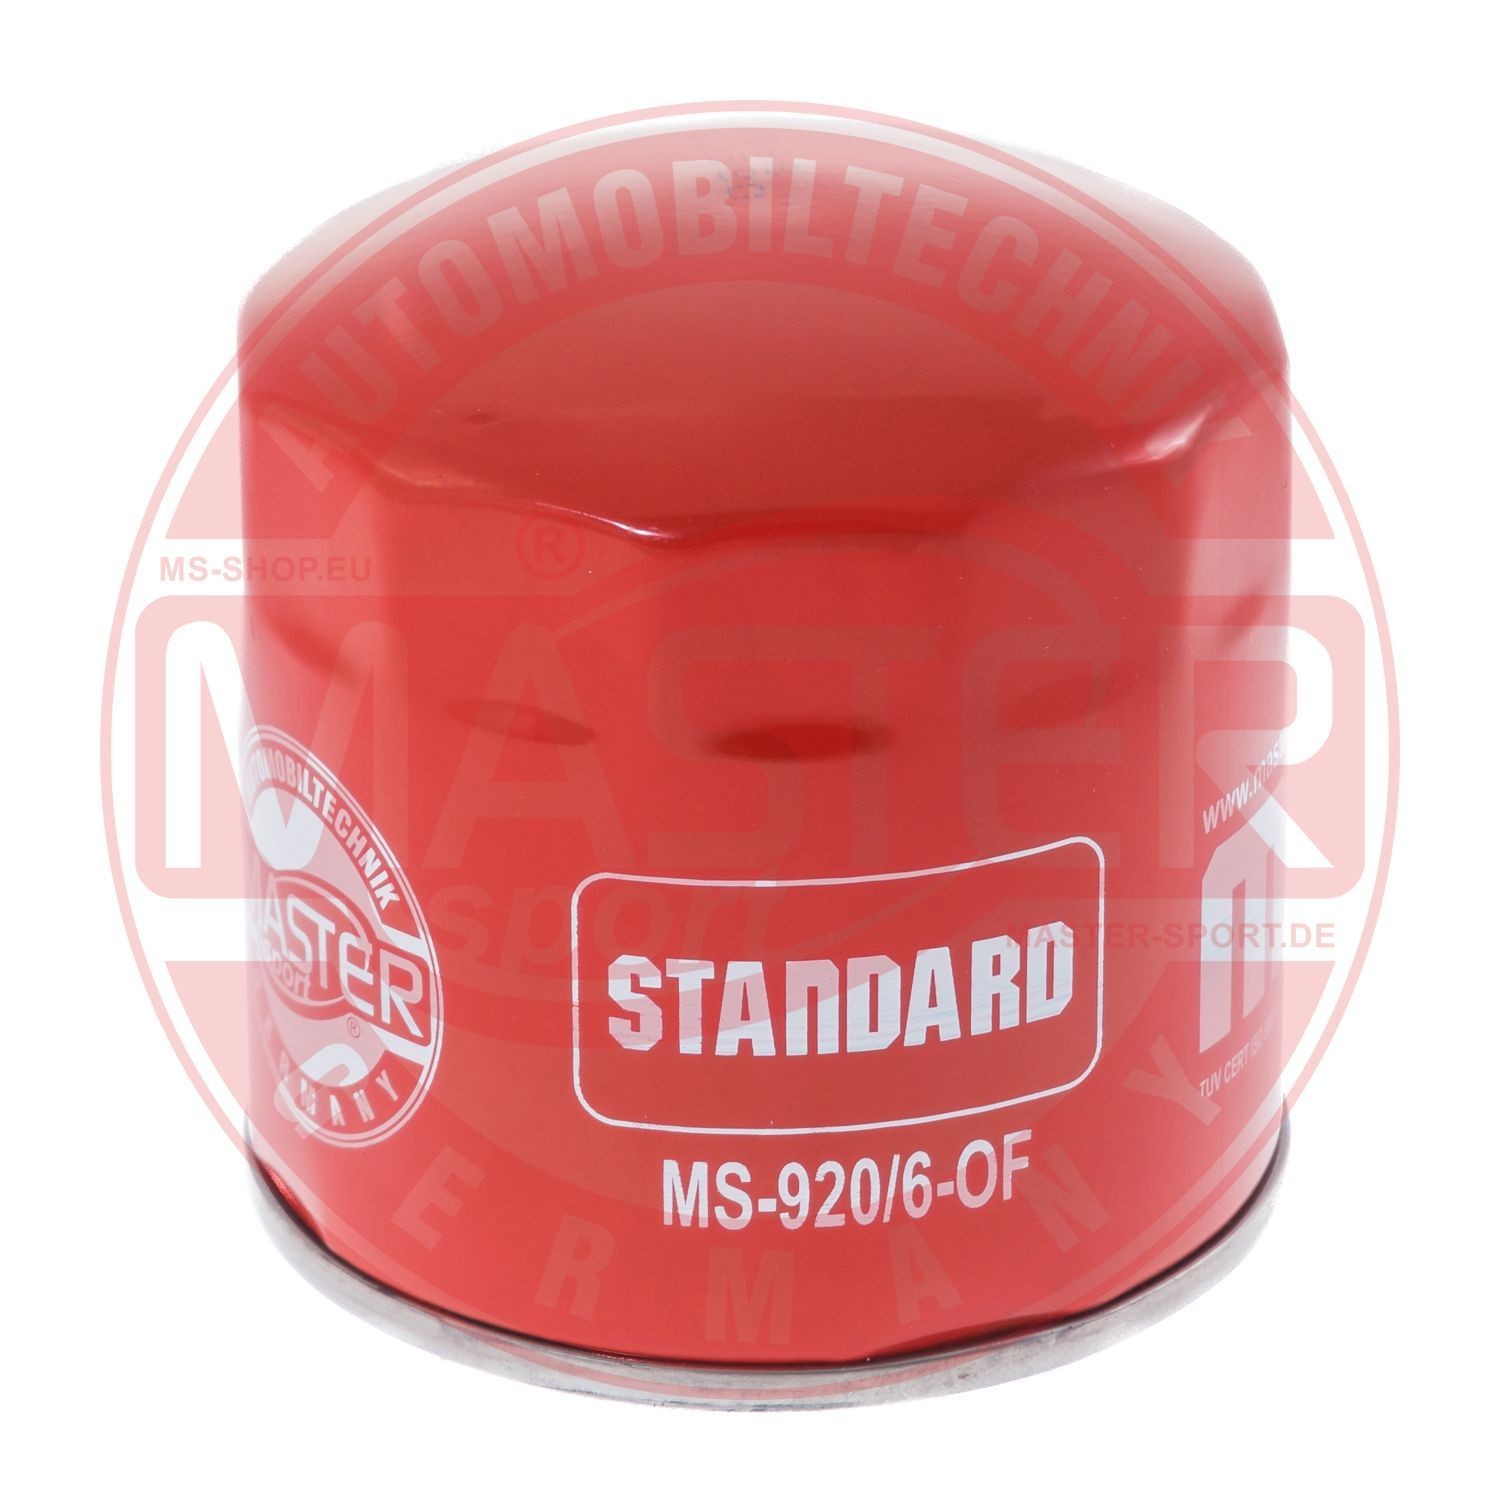 MASTER-SPORT 920/6-OF-PCS-MS Oil filter 3/4-16 UNF, with one anti-return valve, Filter Insert